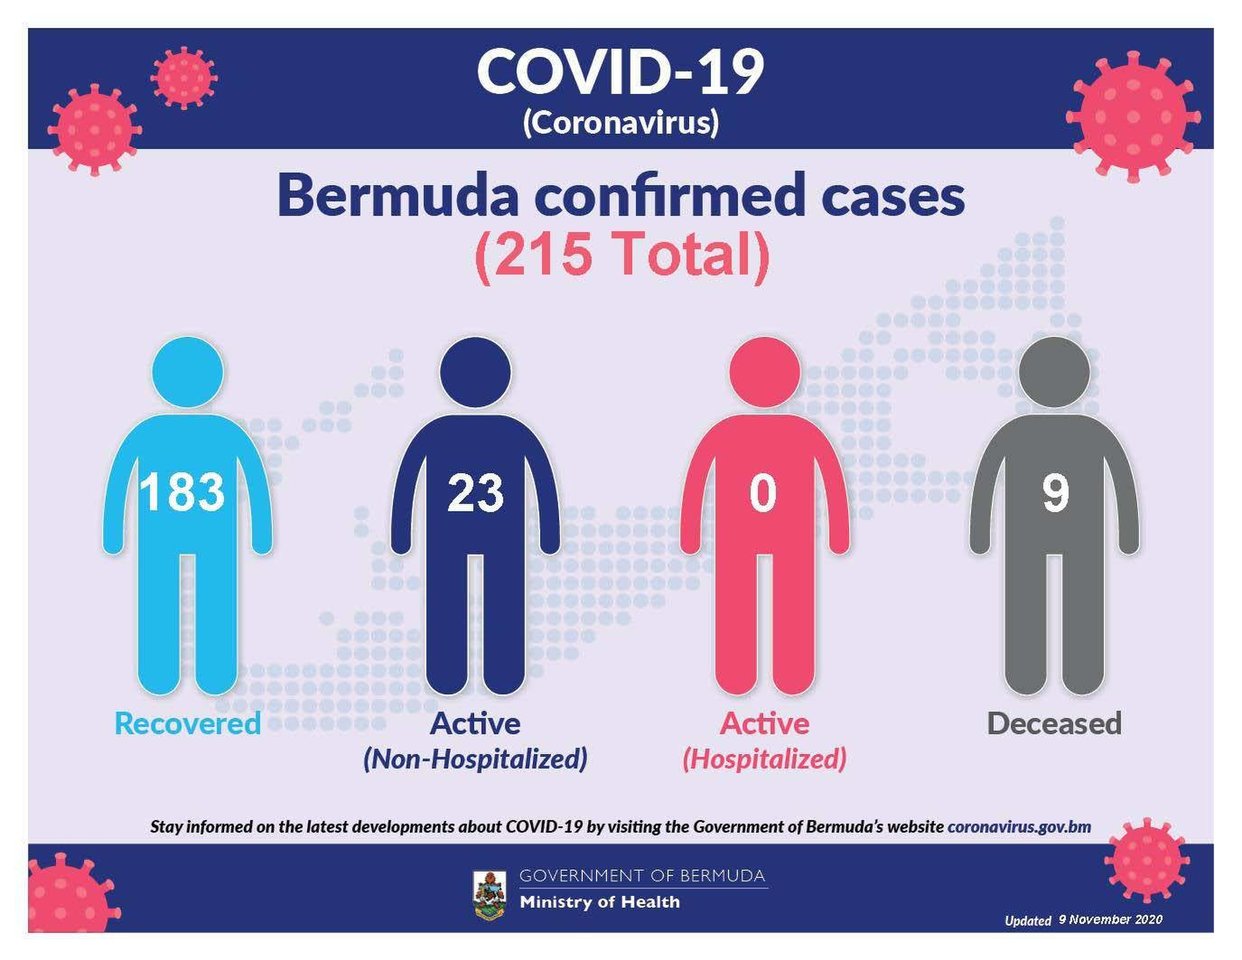 One new imported COVID-19 case reported in Bermuda, 10 November